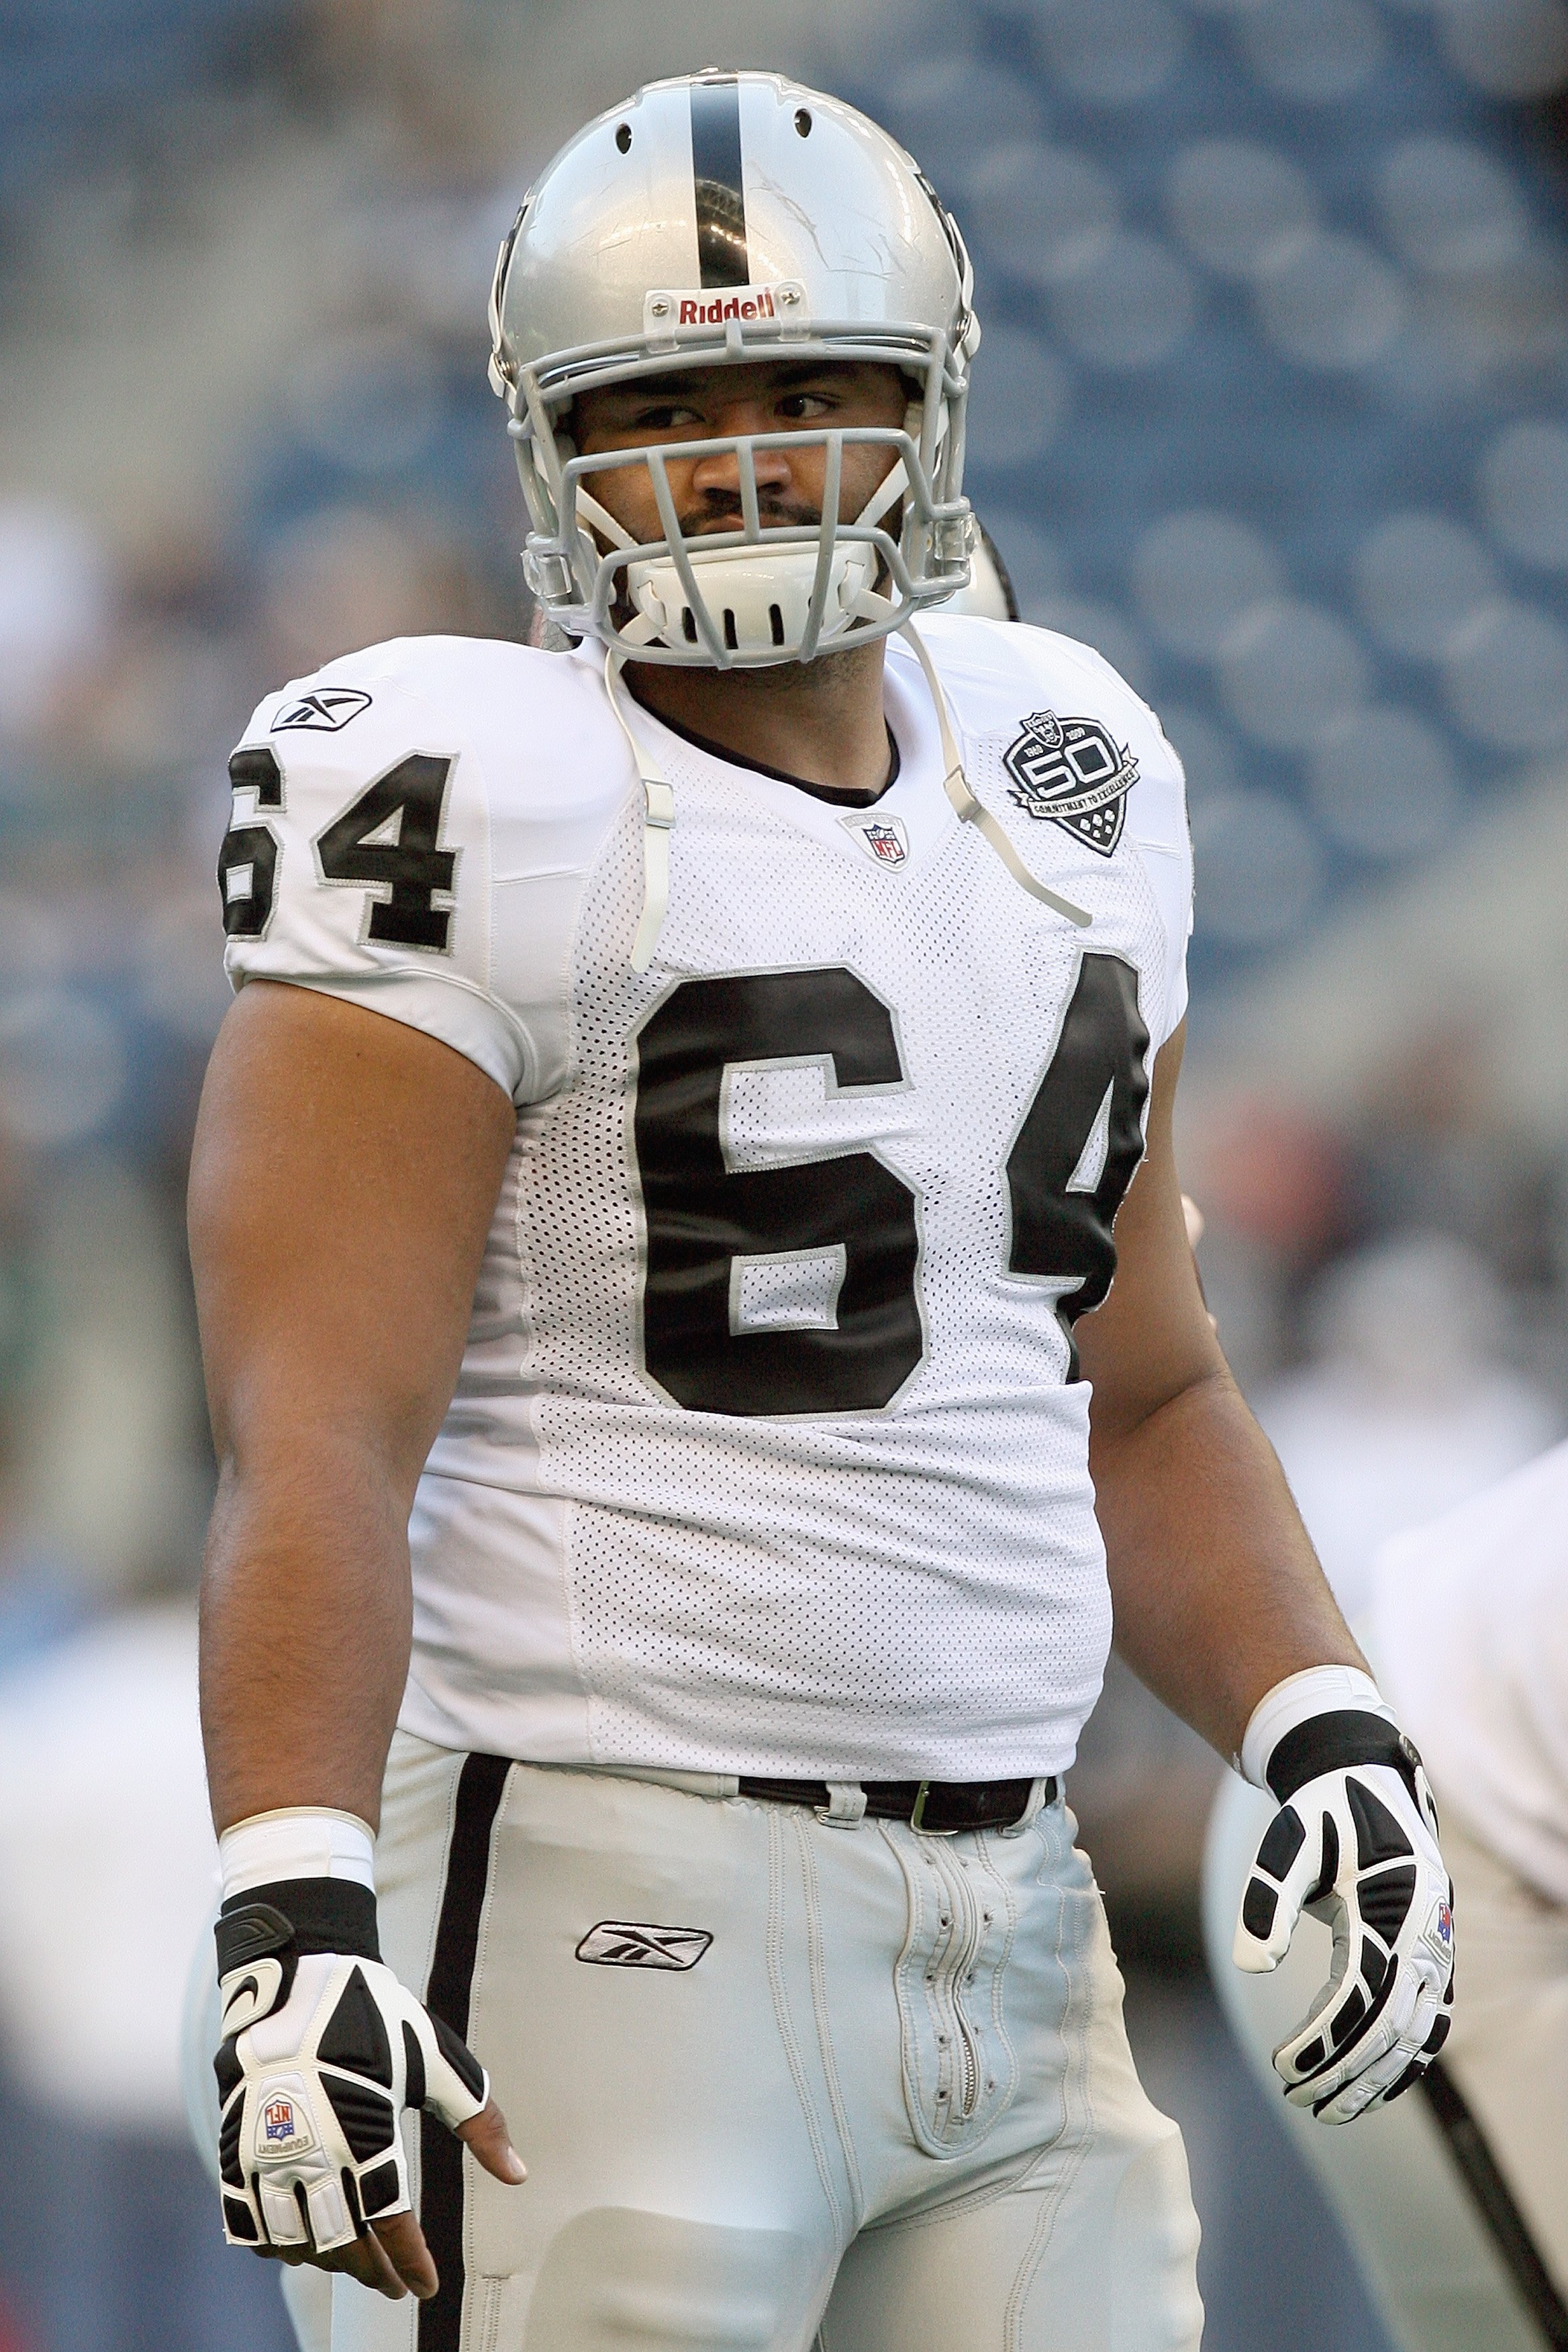 SEATTLE - SEPTEMBER 03: Samson Satele #64 of the Oakland Raiders stands on the field before the game against the Seattle Seahawks on September 3, 2009 at Qwest Field in Seattle, Washington. (Photo by Otto Greule Jr/Getty Images)